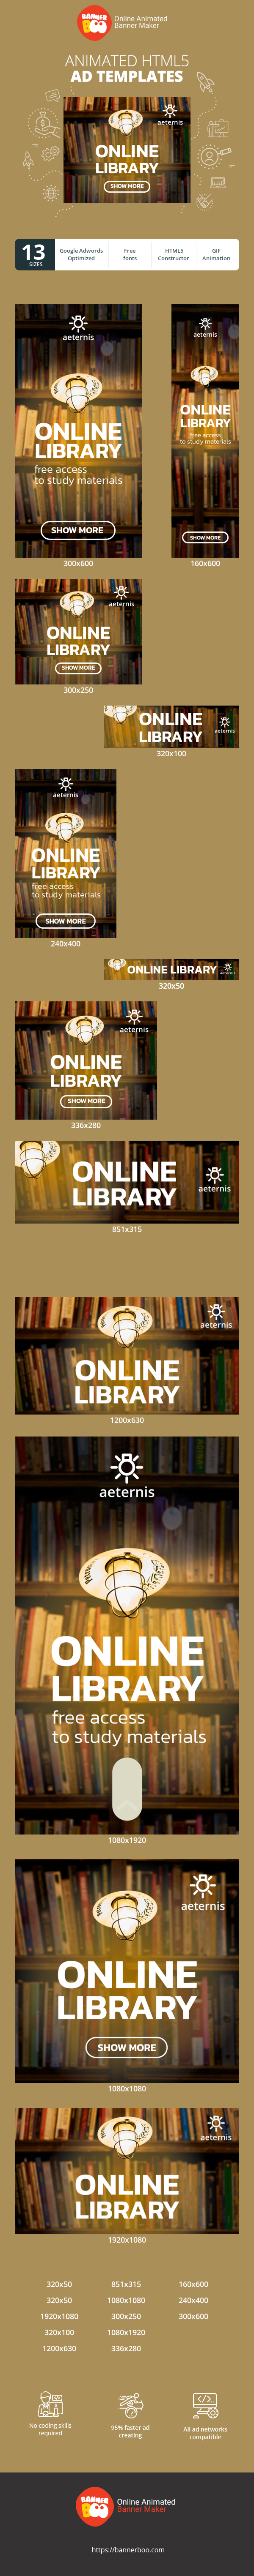 Szablon reklamy banerowej — Online Library — Free Access To Study Materials